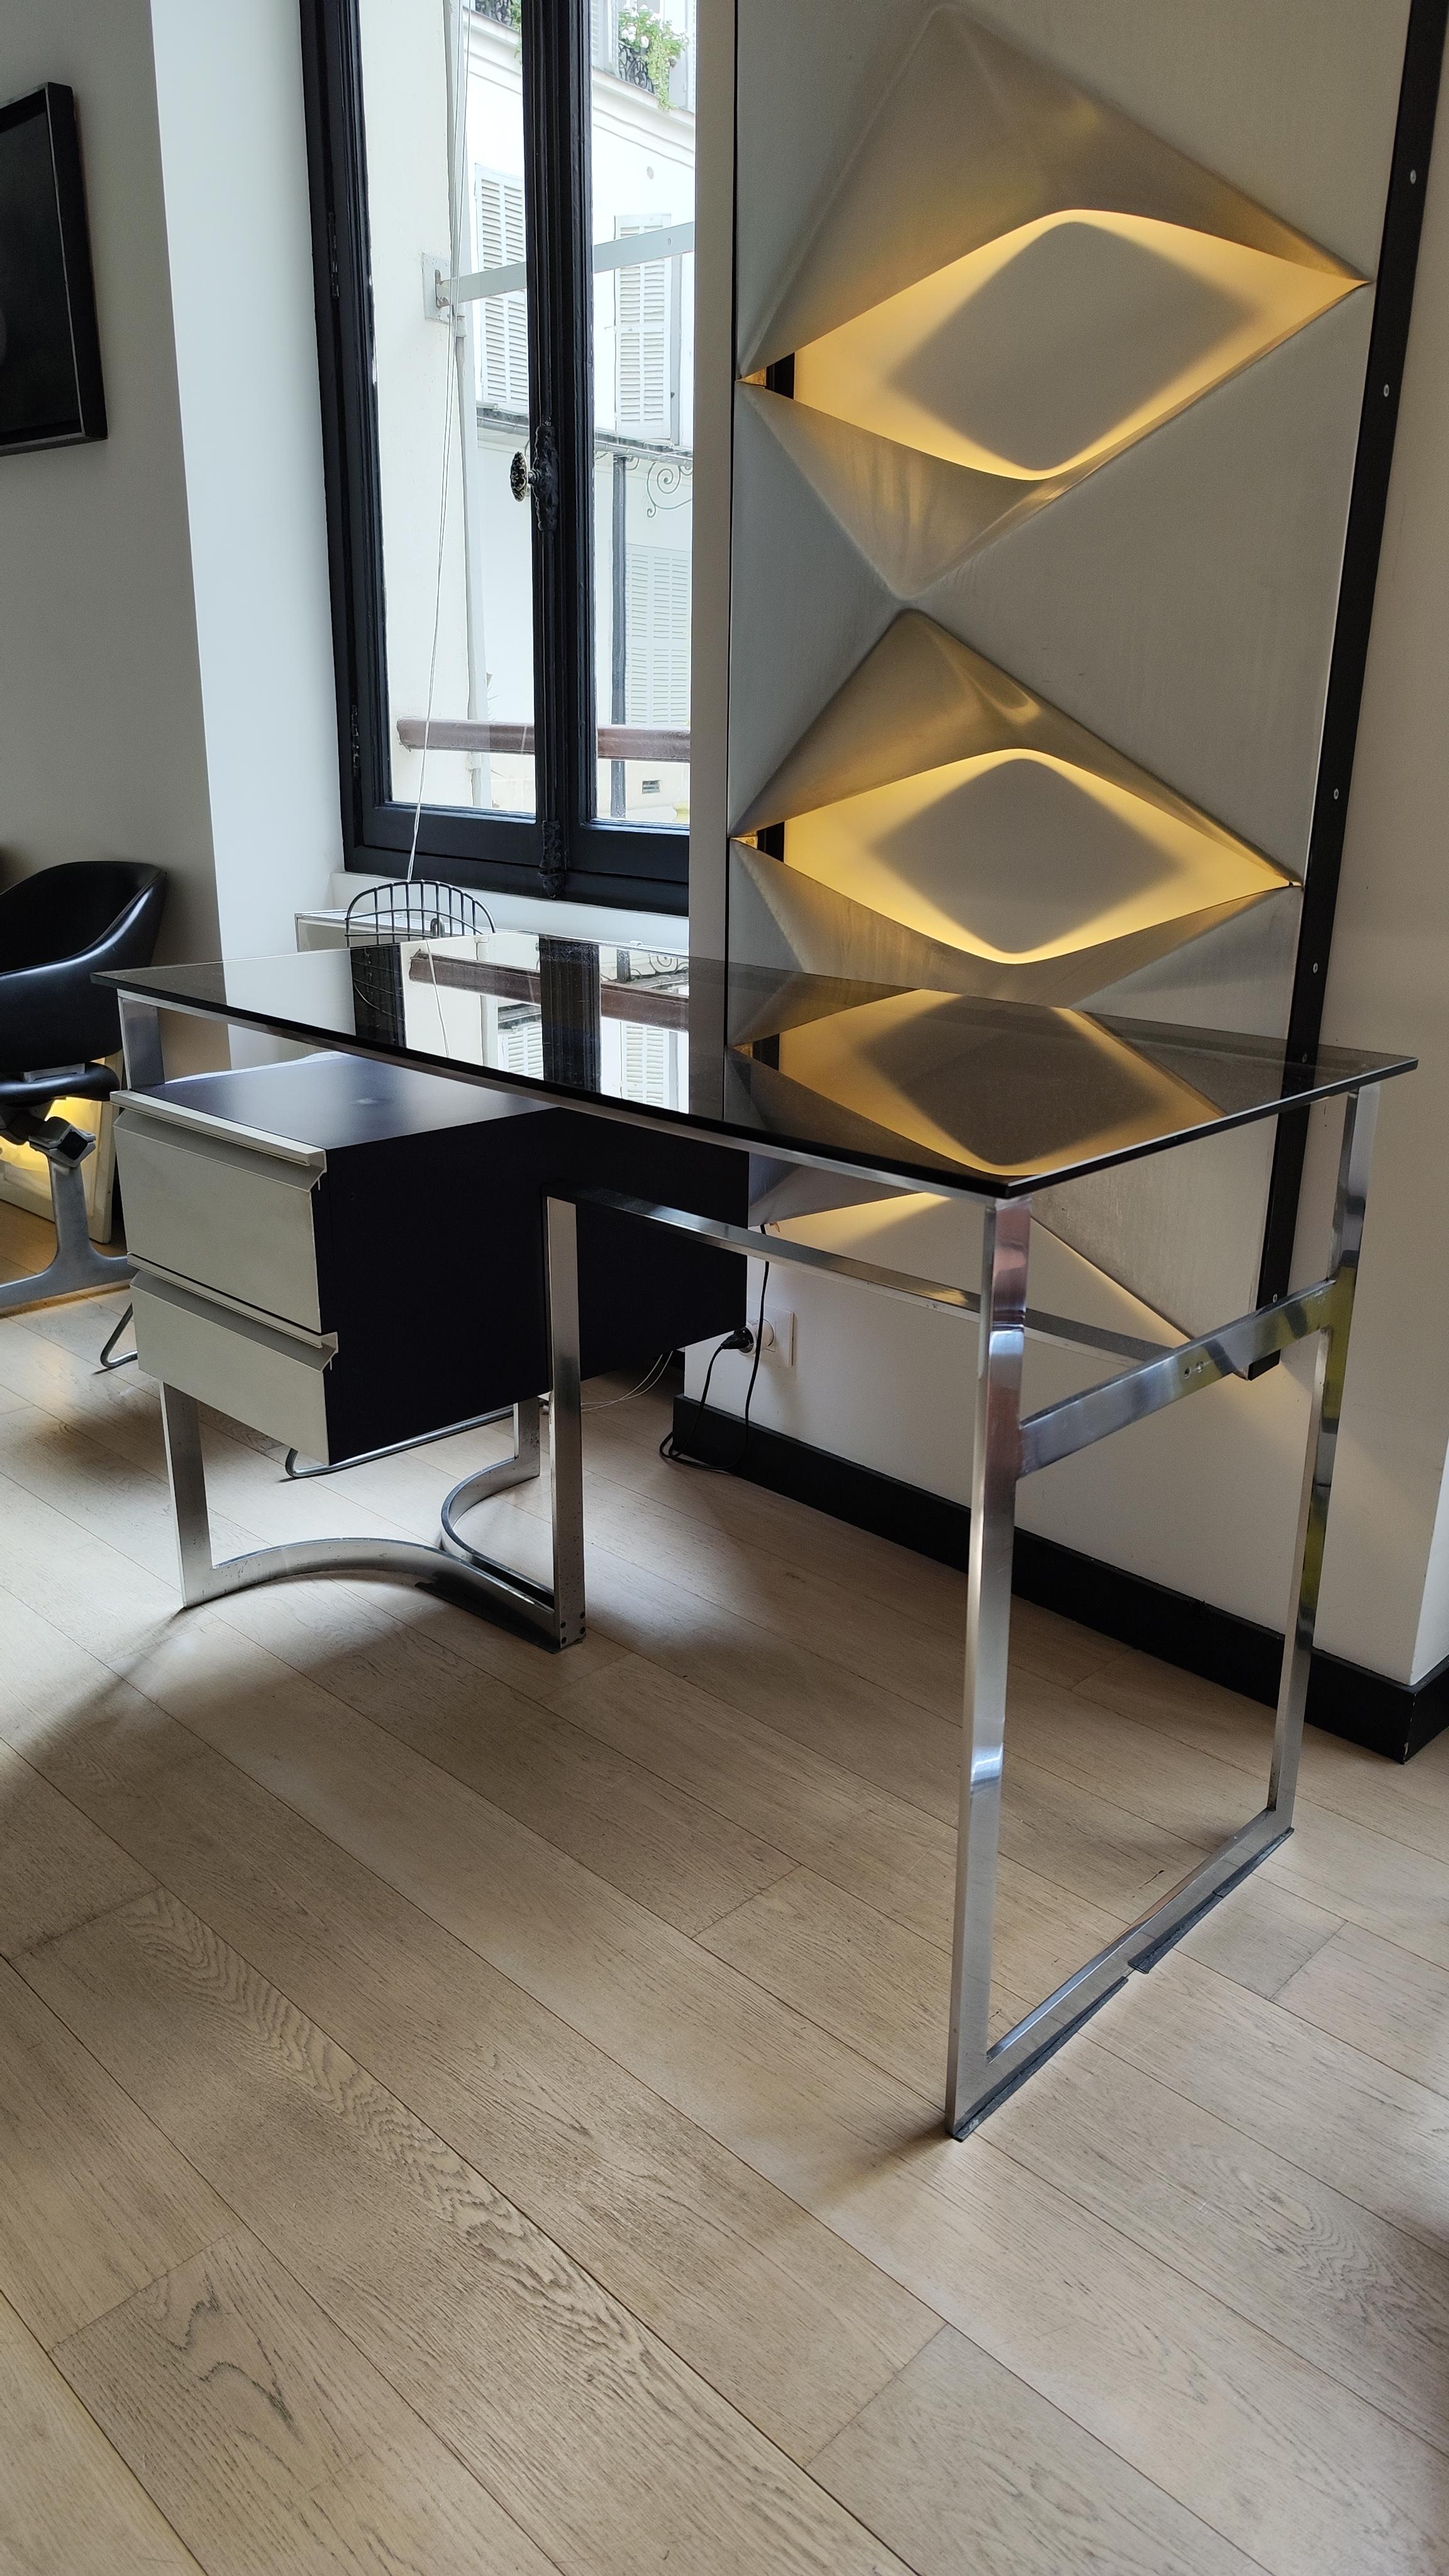 Patrice Maffei Desk for Kappa, 70s, Brushed Stainless Steel, Smoked Glass, 1970 For Sale 3